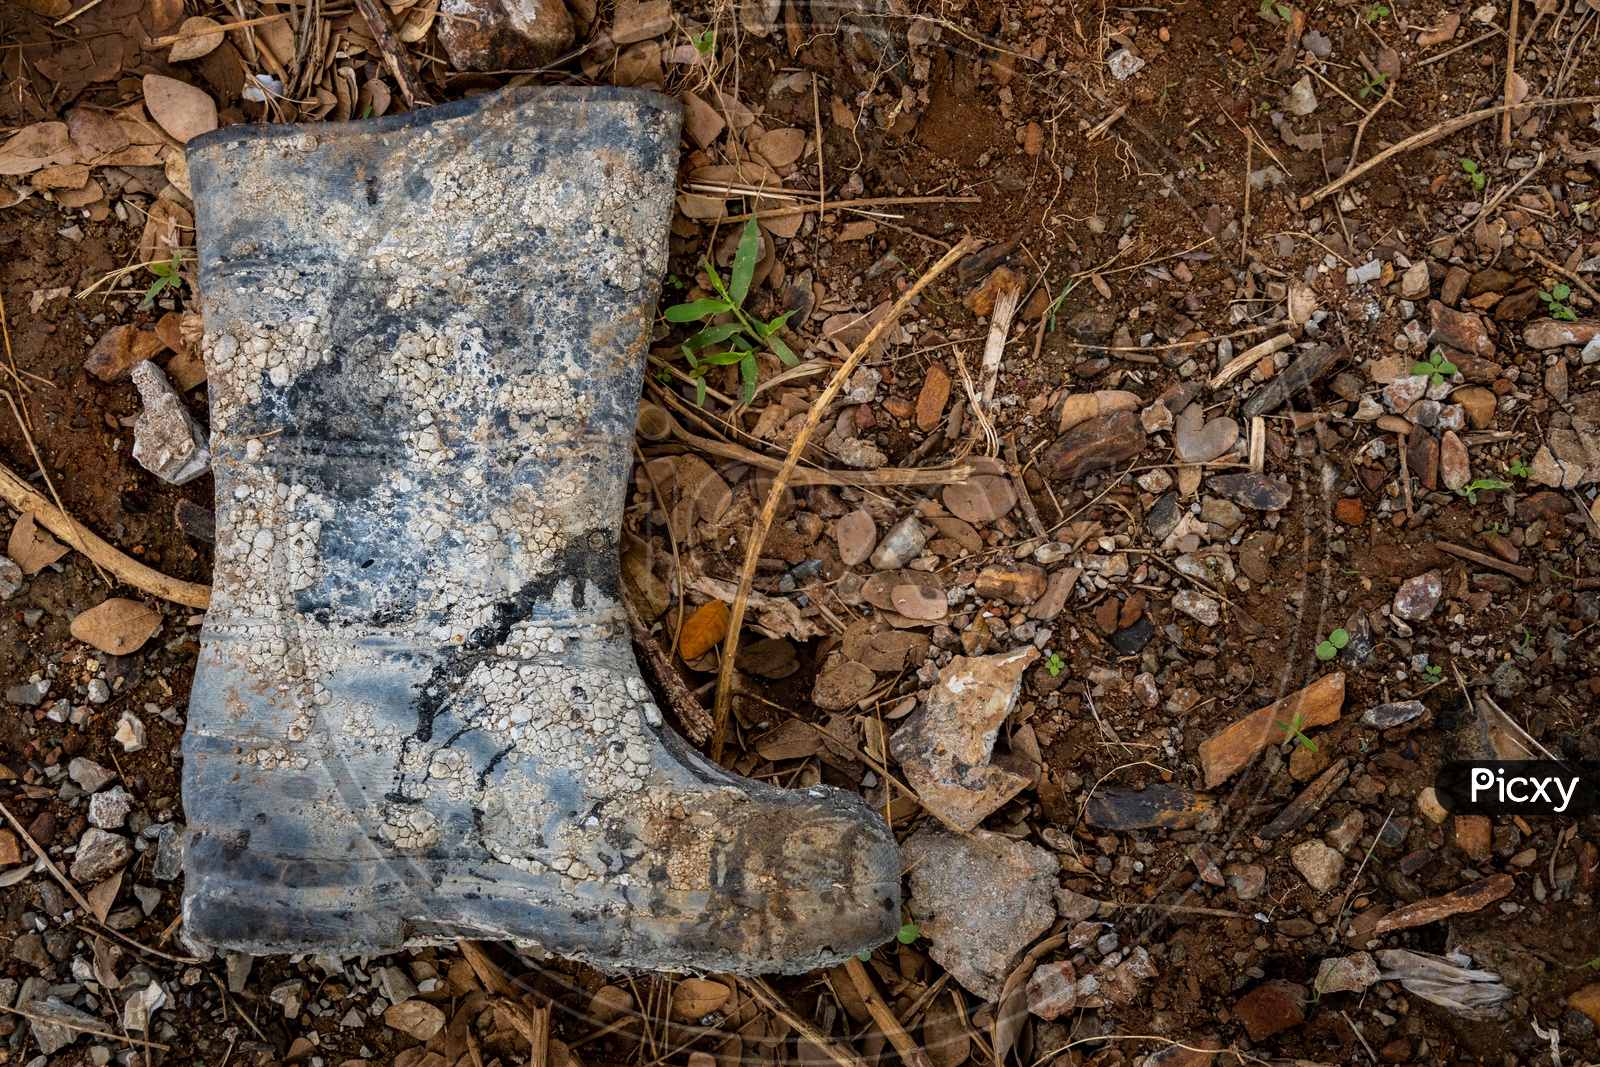 Deceased Safety Shoe of a Construction Worker